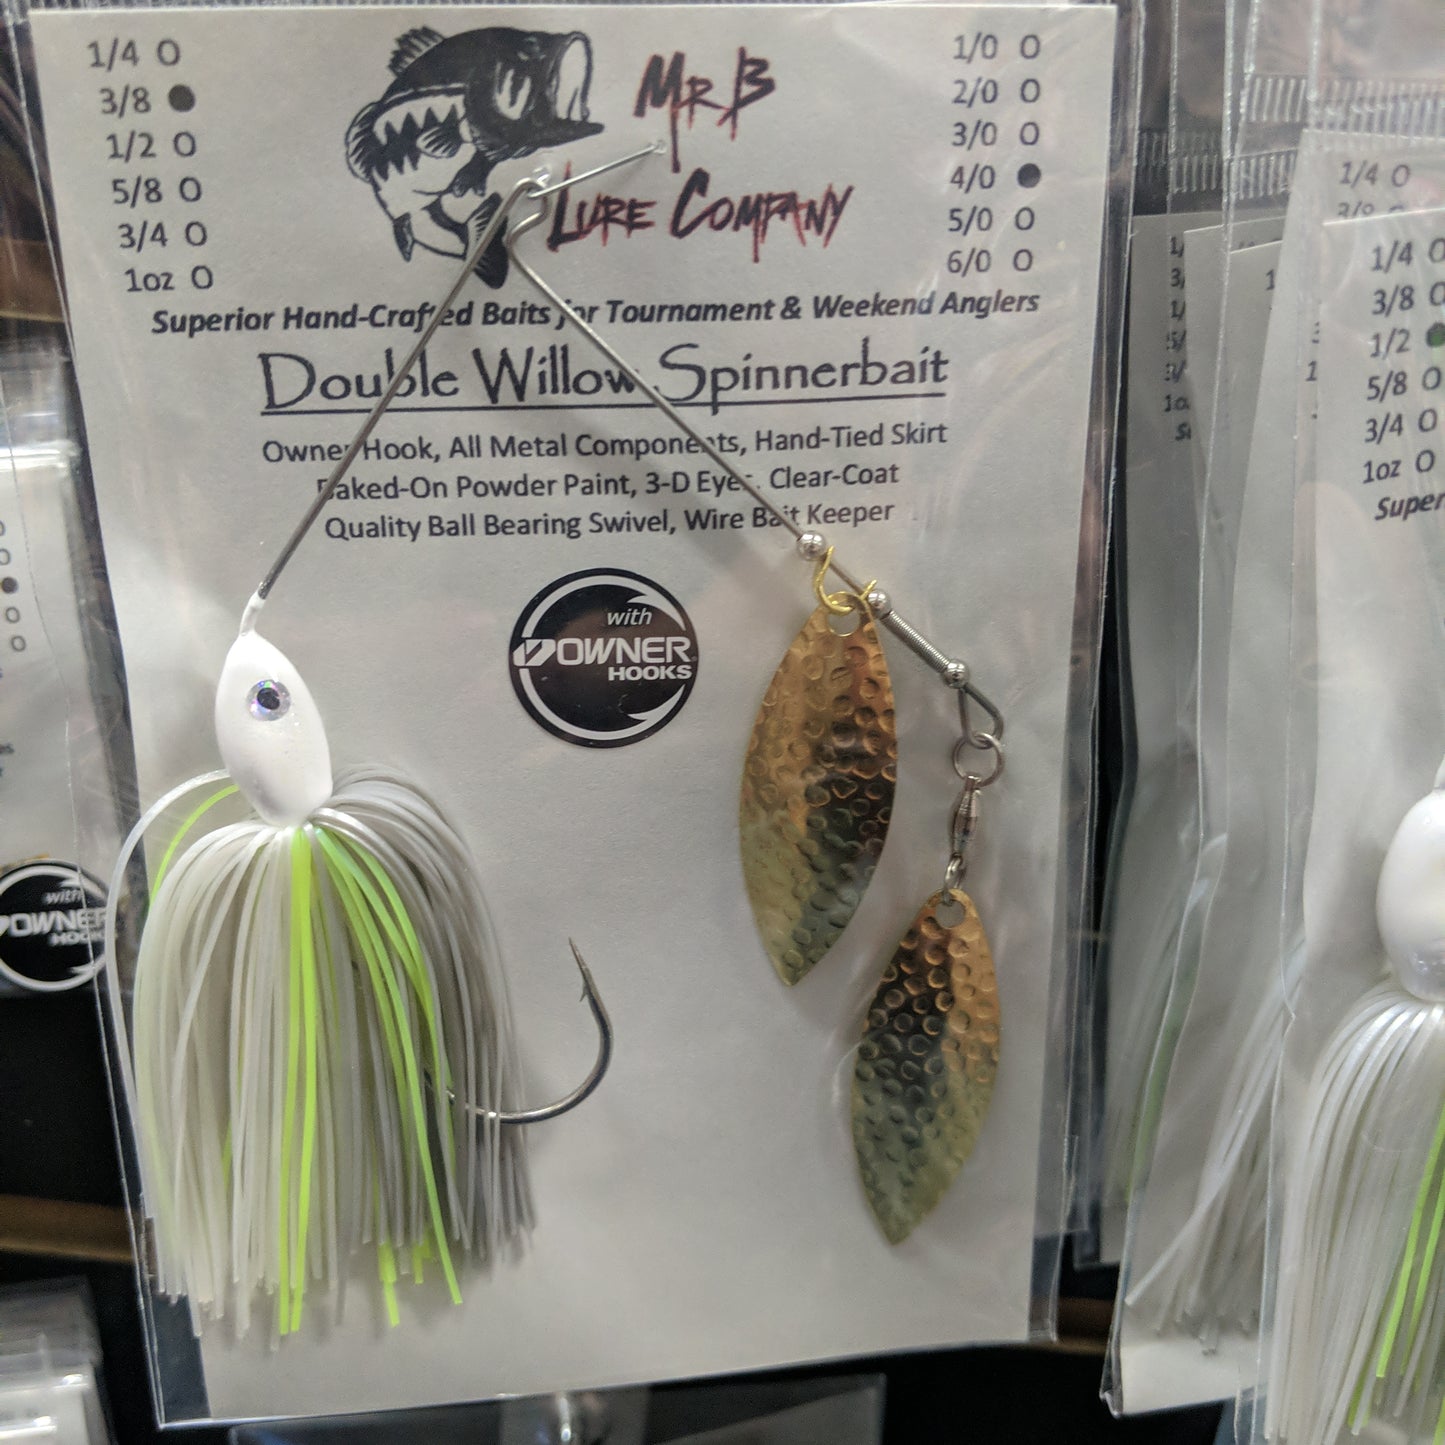 MR B DOUBLE WILLOW SPINNERBAIT